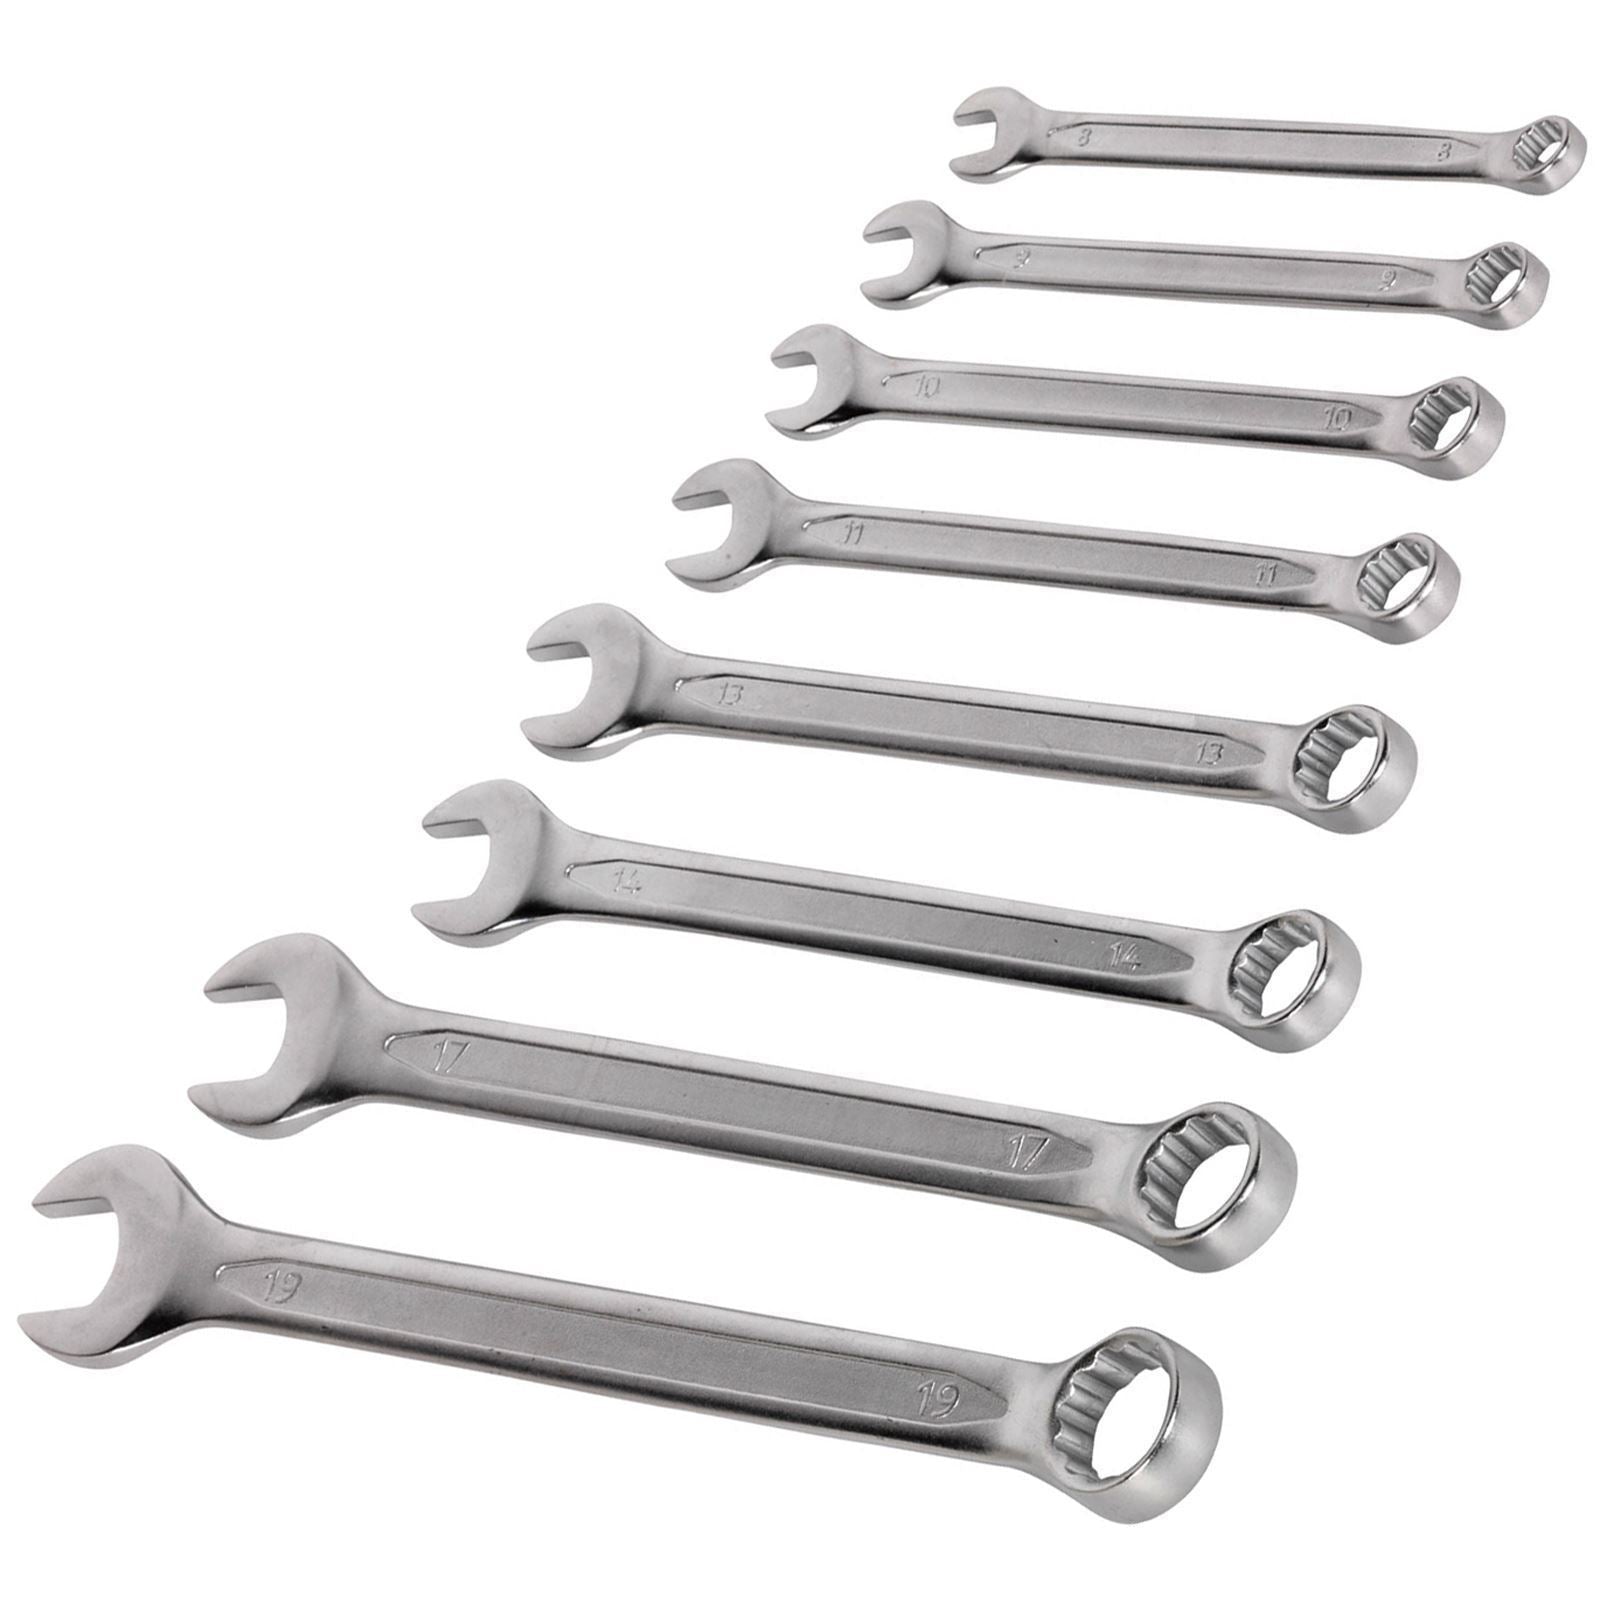 Sealey Premier 8 Piece Combination Spanner Set 8-19mm Open End Ring Spanners